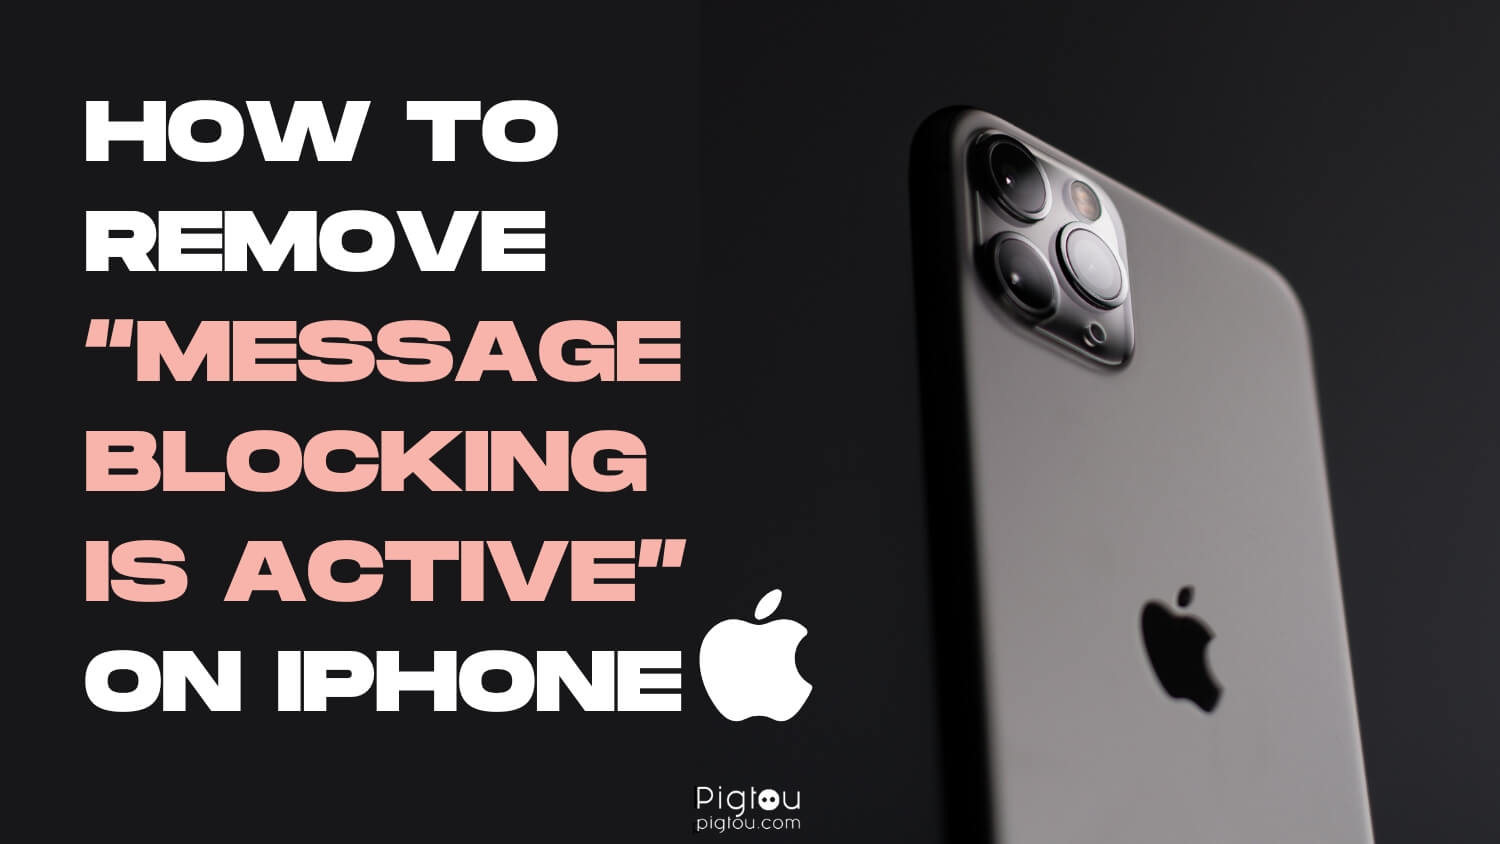 How to Remove “Message Blocking Is Active” on iPhone [EXPLAINED!]